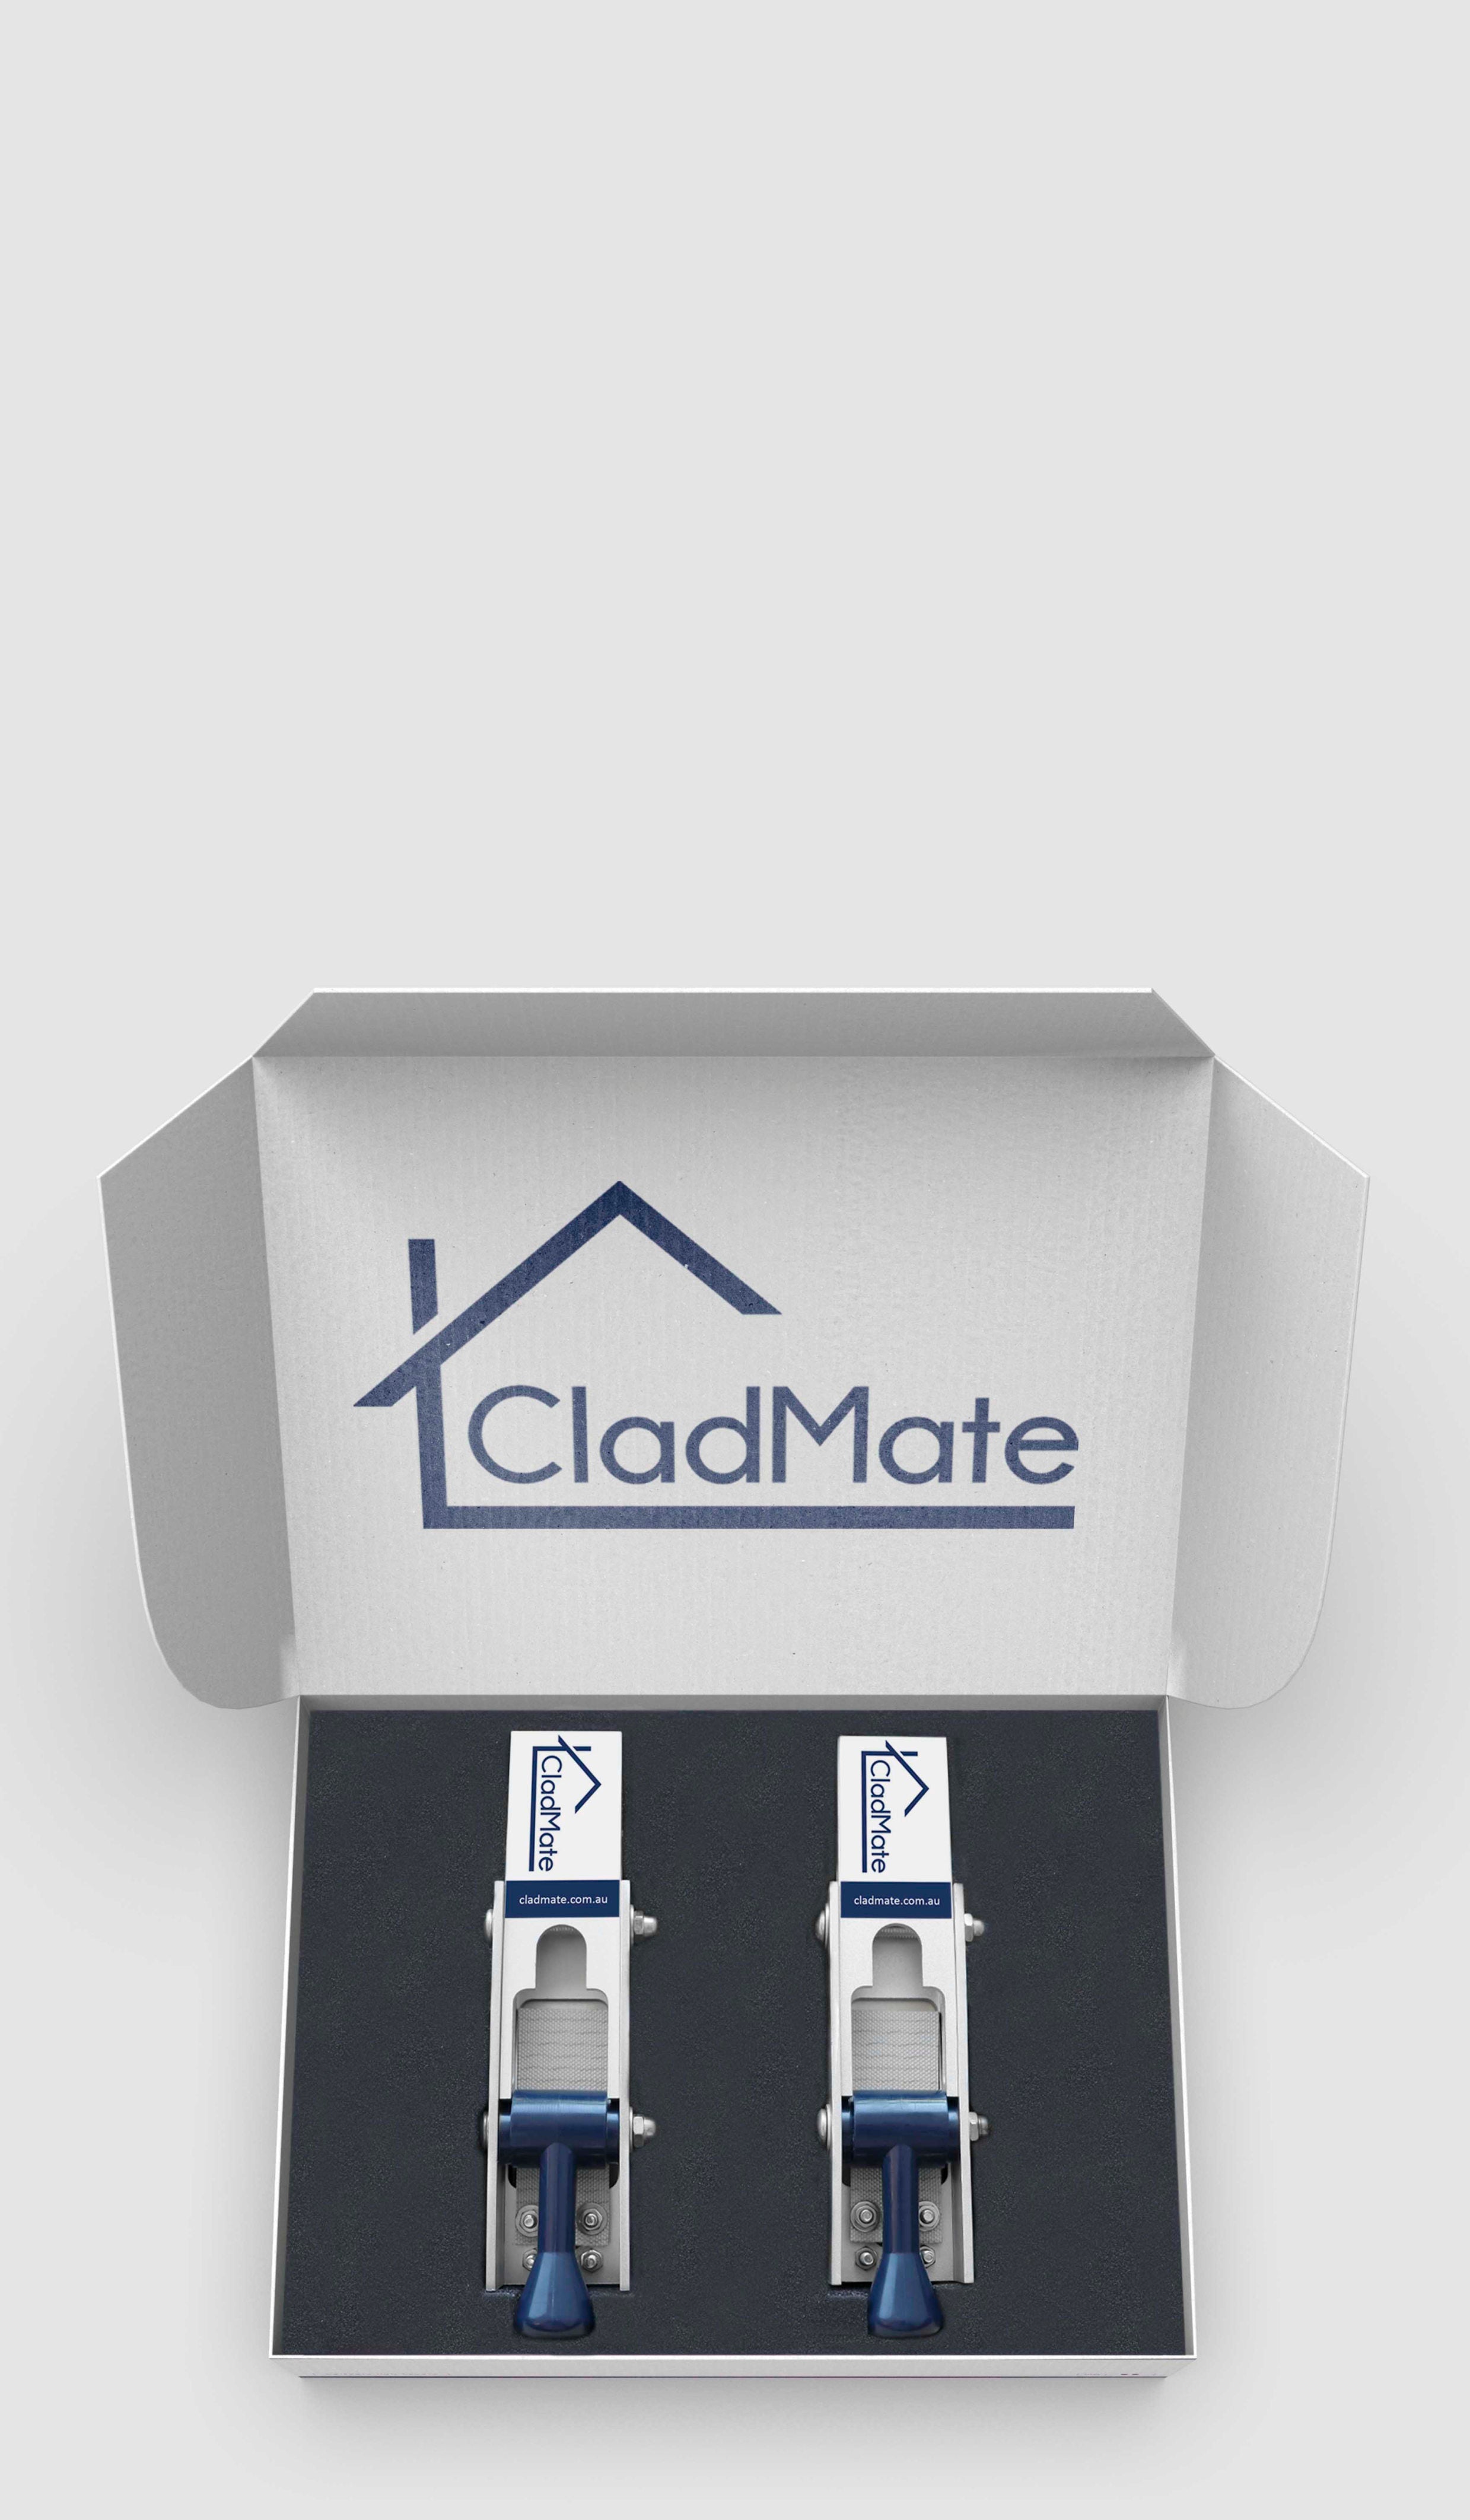 Join Thousands of Carpenters Using CladMate to Install Weatherboards Faster